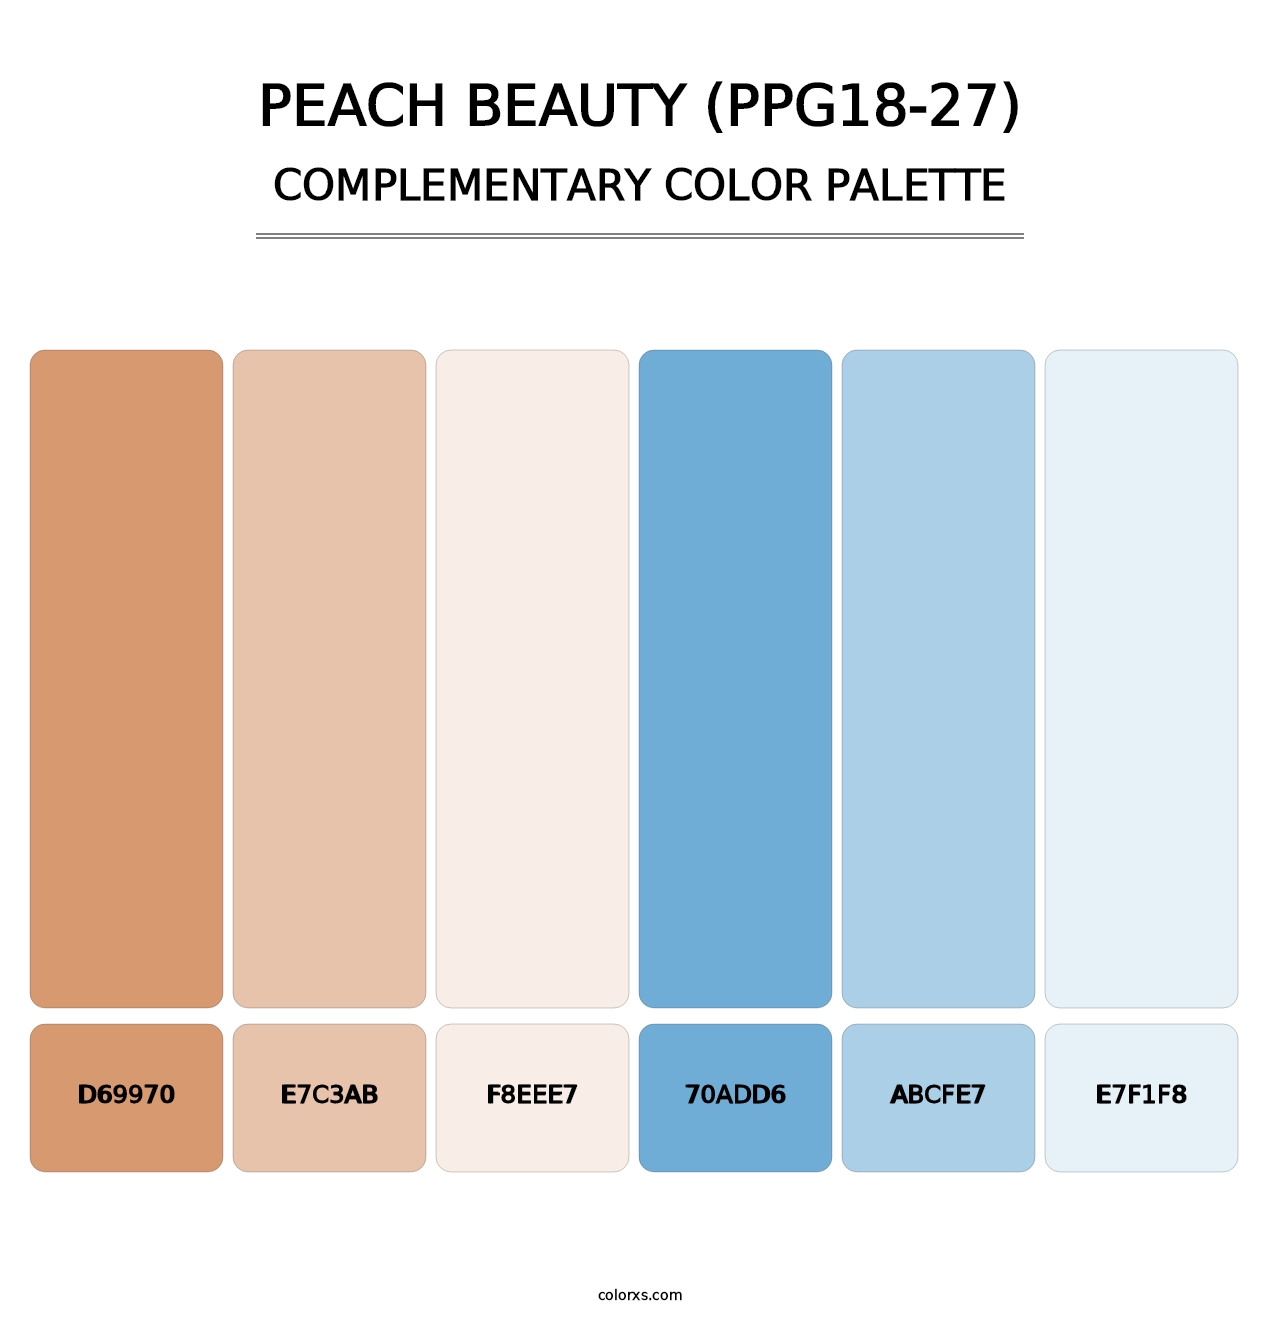 Peach Beauty (PPG18-27) - Complementary Color Palette